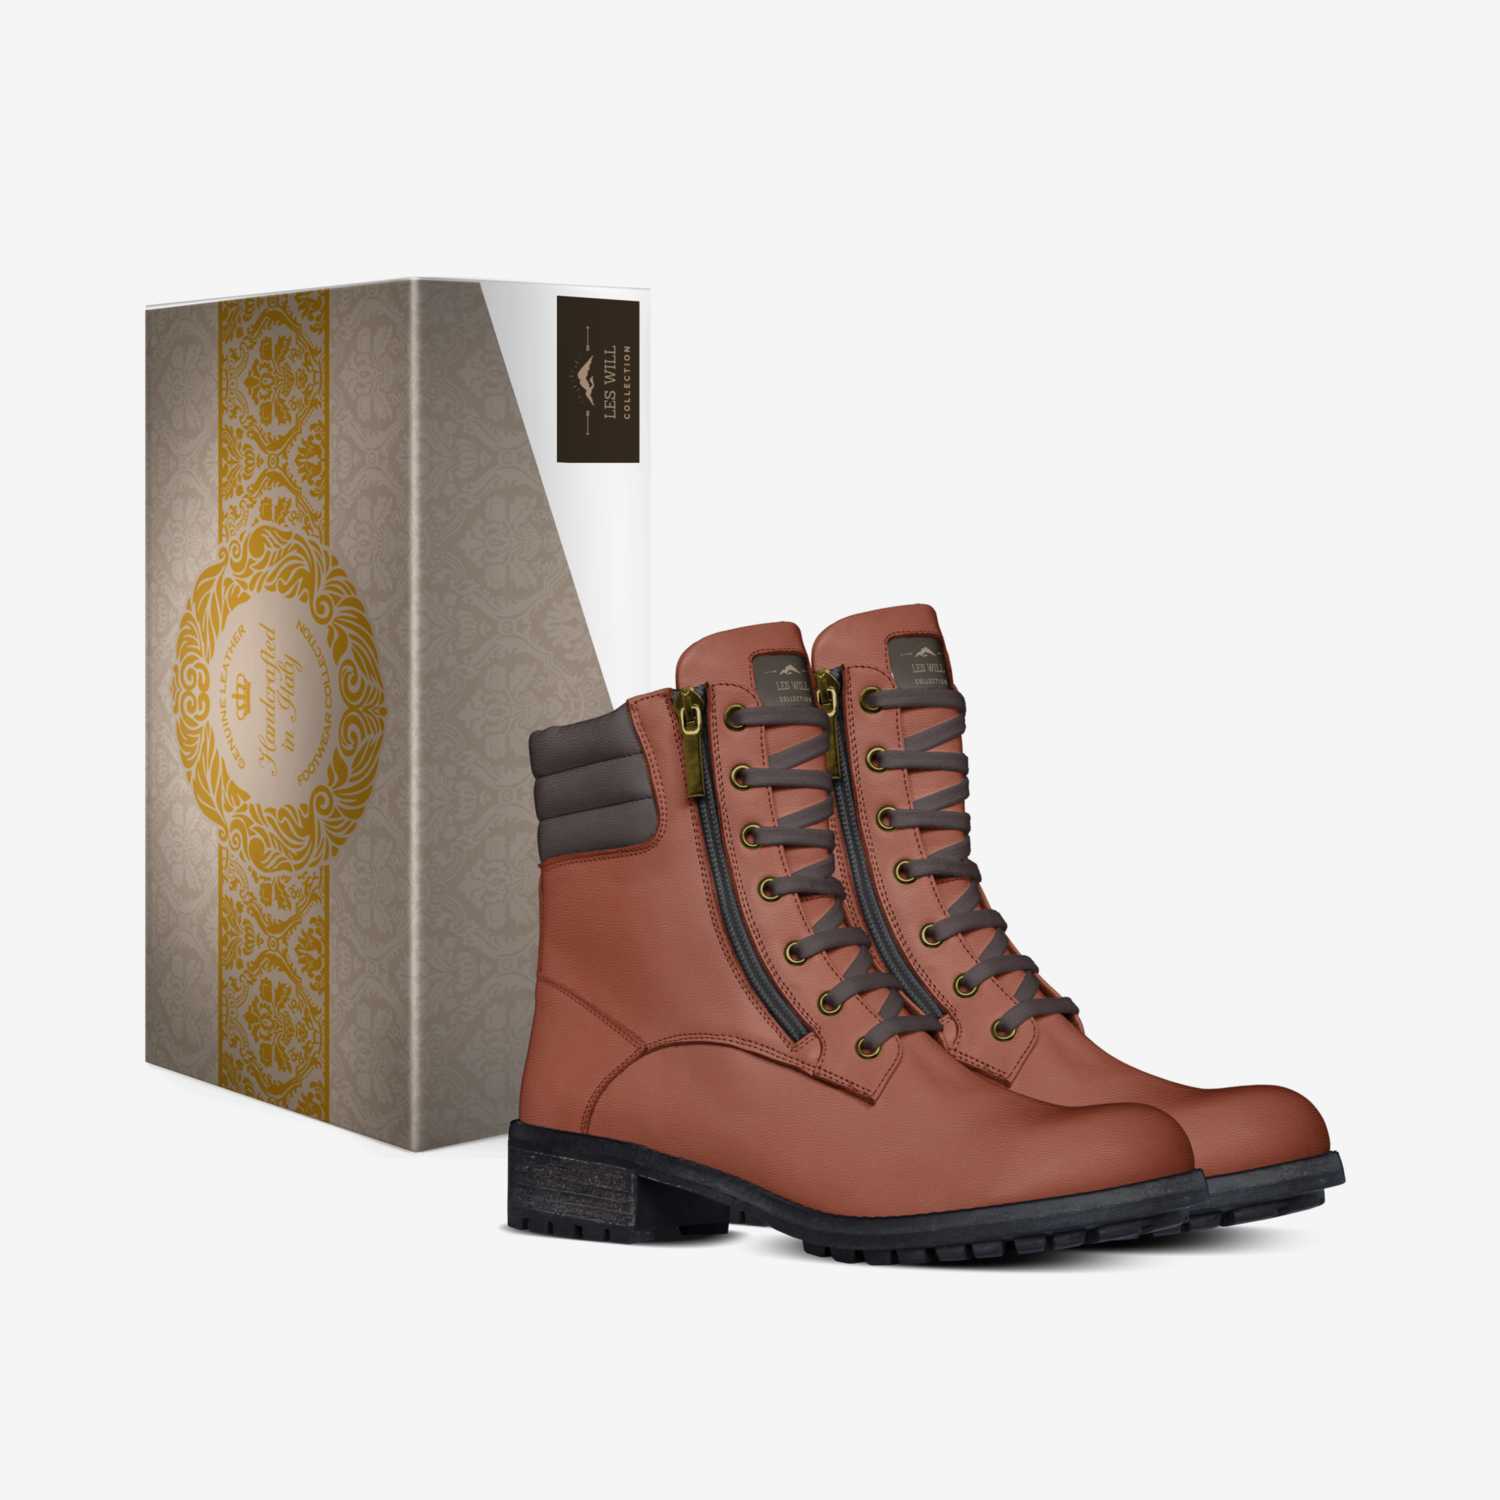 LW-Hiker custom made in Italy shoes by Les Will | Box view